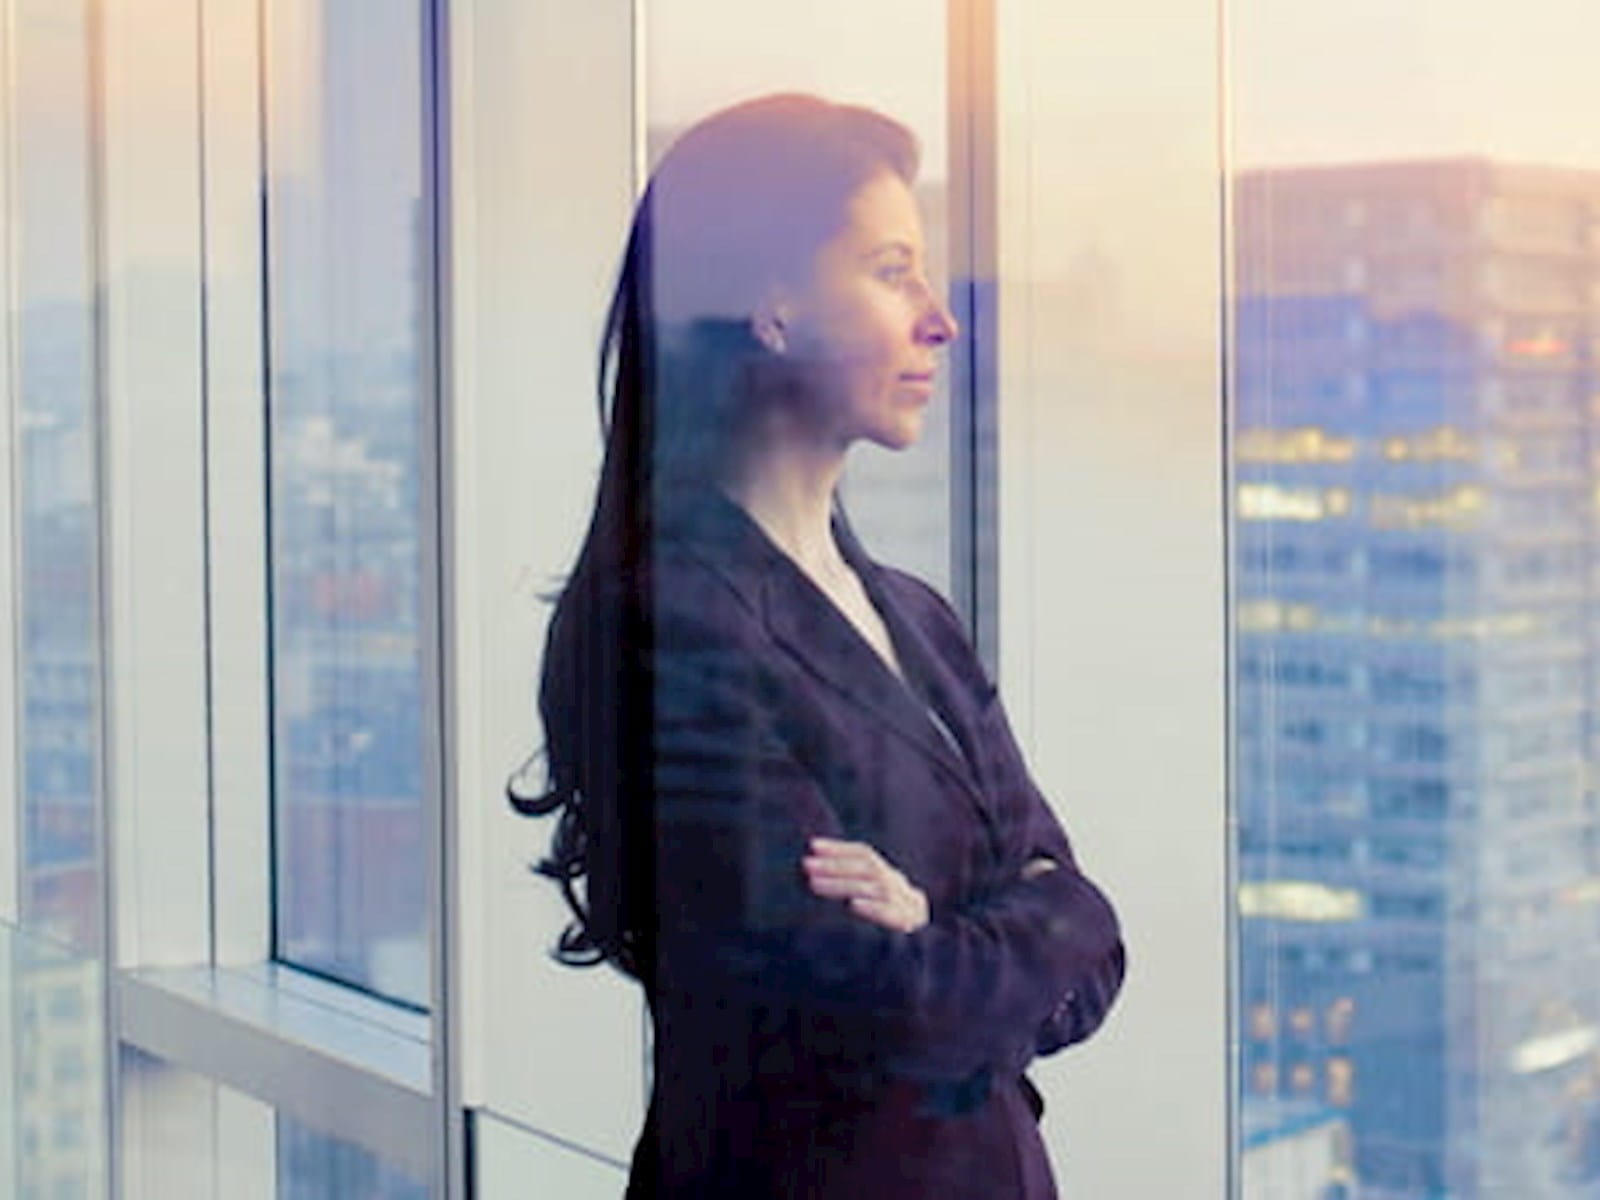 An office worker staring out of an office window over a city